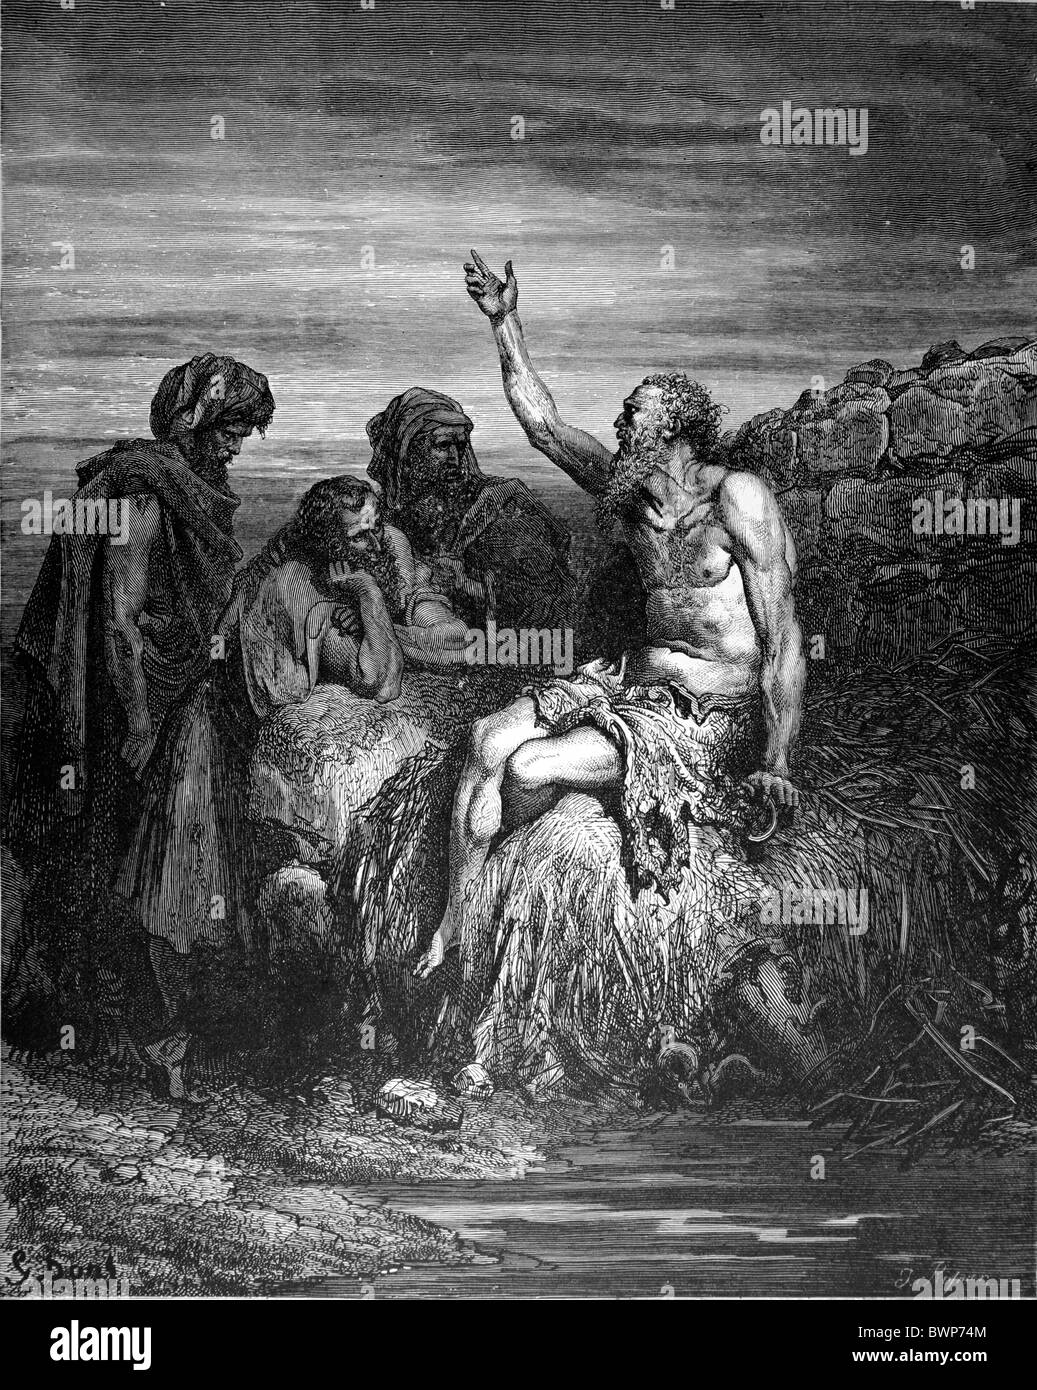 Gustave Doré; Job and His Friends, a scene from the Old Testament; Black and White Engraving Stock Photo